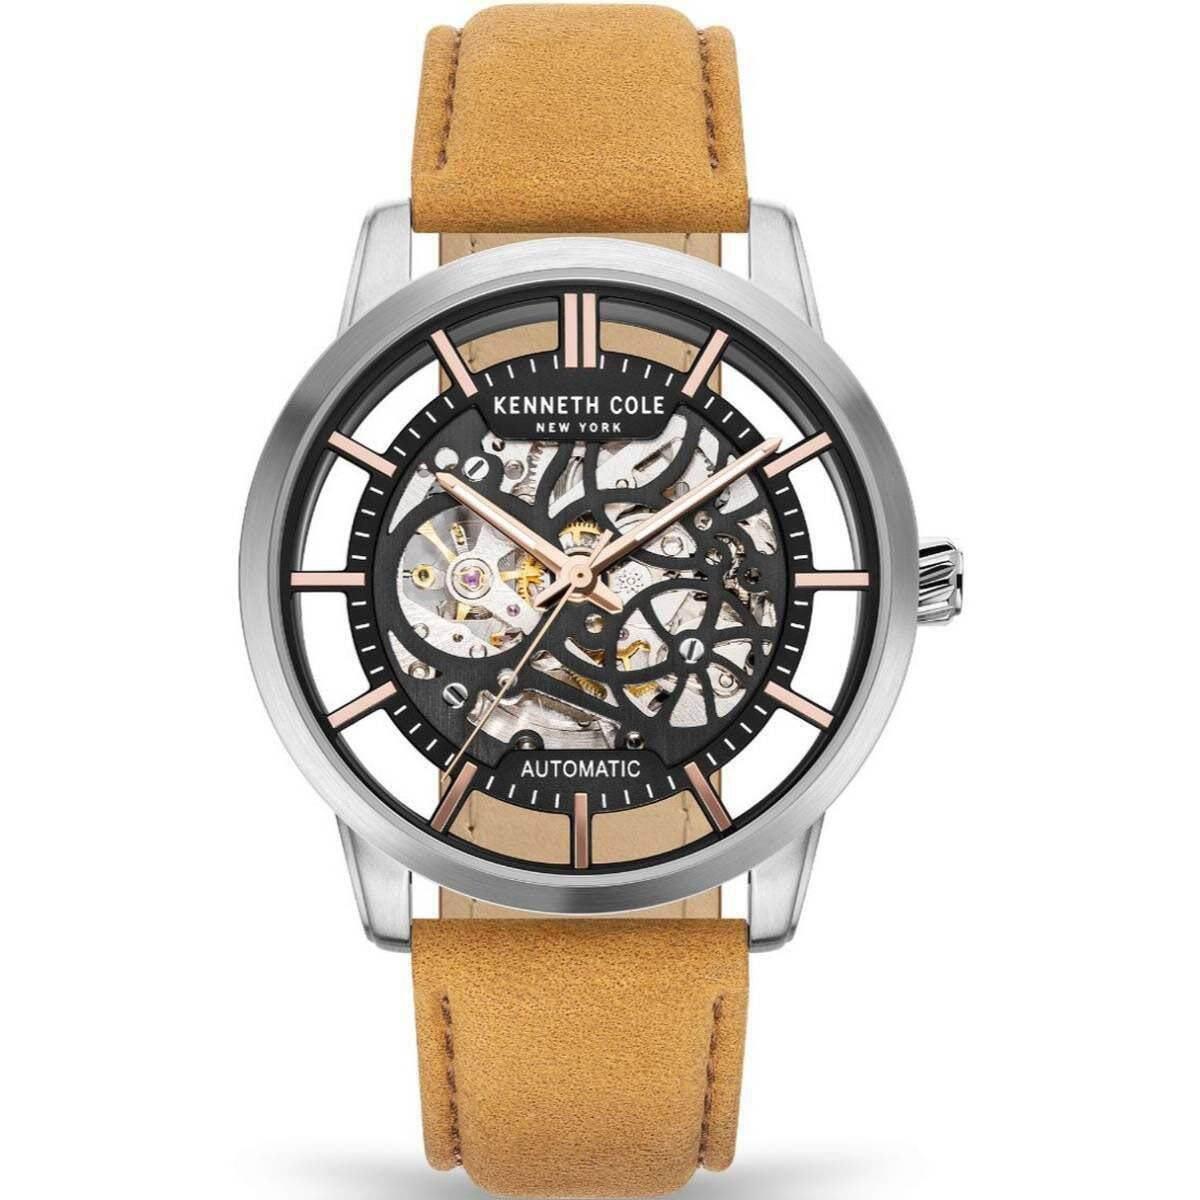 Kenneth Cole York Men`s Skeleton Automatic Watch - Brown Dial, Beige Band, Silver Bezel